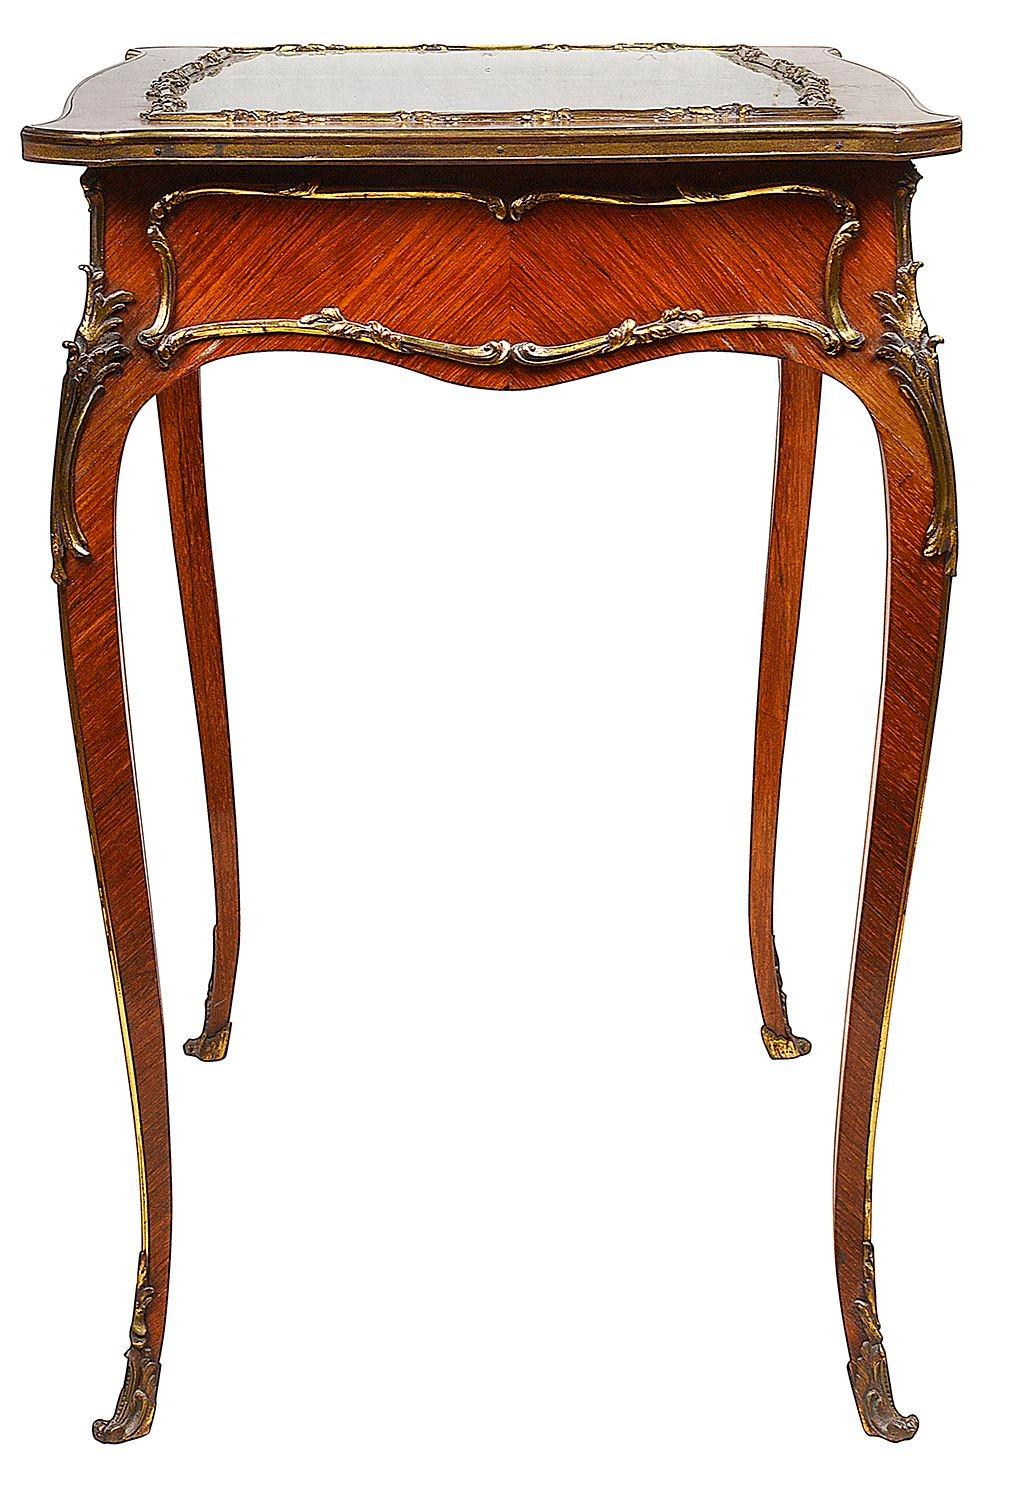 French Kingwood Bijouterie Table, 19th Century In Good Condition For Sale In Brighton, Sussex